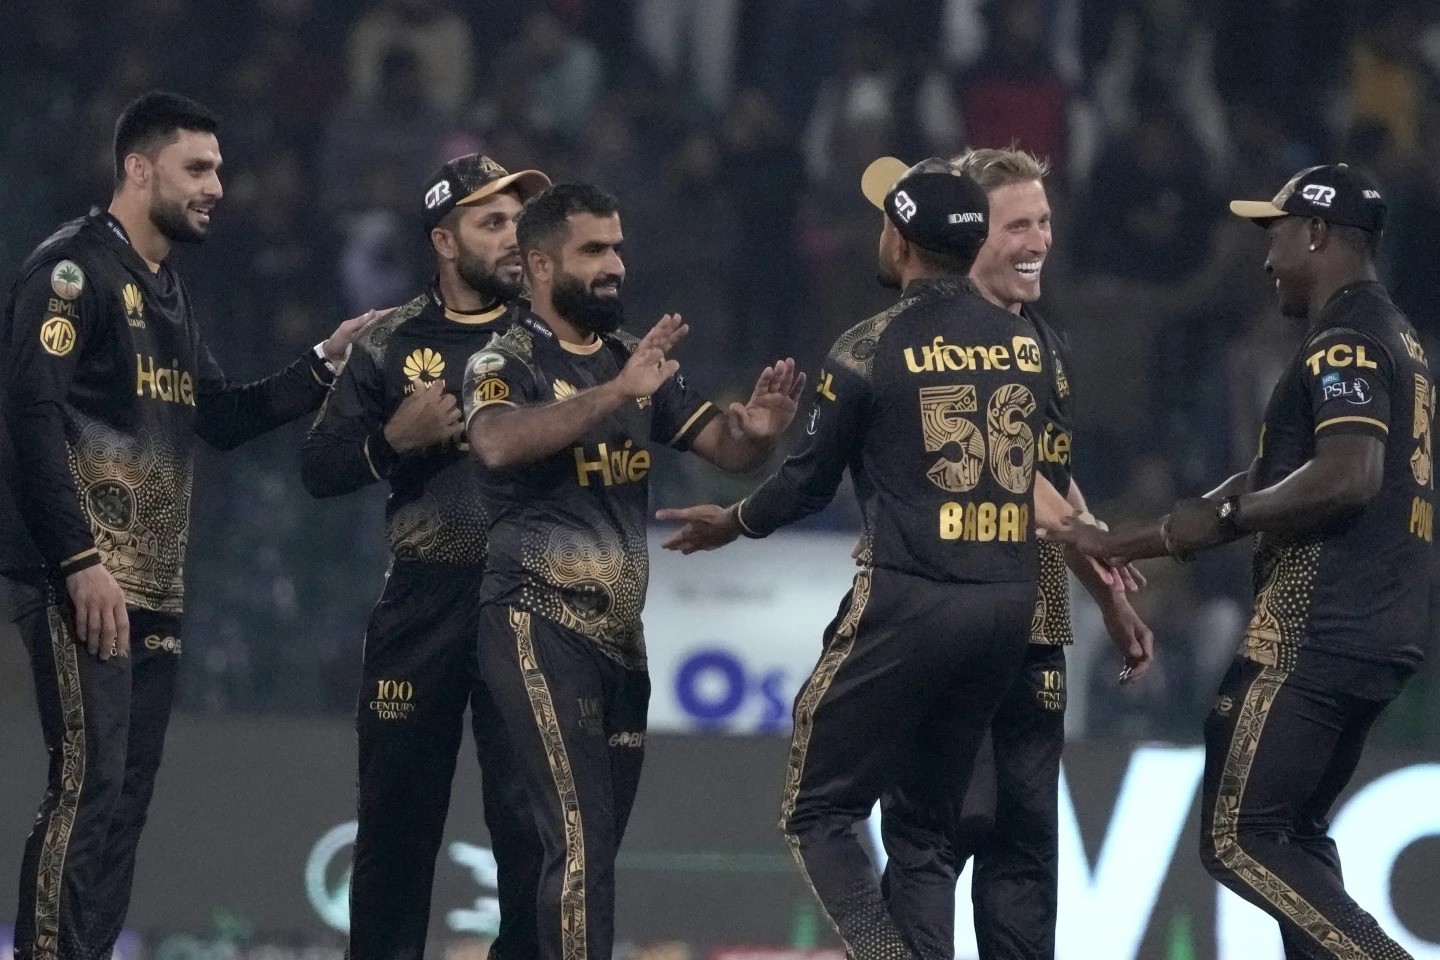 Peshawar Zalmi’ Arif Yaqoob, thrid left, celebrates with teammates after taking the wicket during the Pakistan Super League T20 cricket match between Peshawar Zalmi and Islamabad United, in Lahore, Pakistan, Monday, Feb. 26, 2024. (AP Photo/K.M. Chaudary)